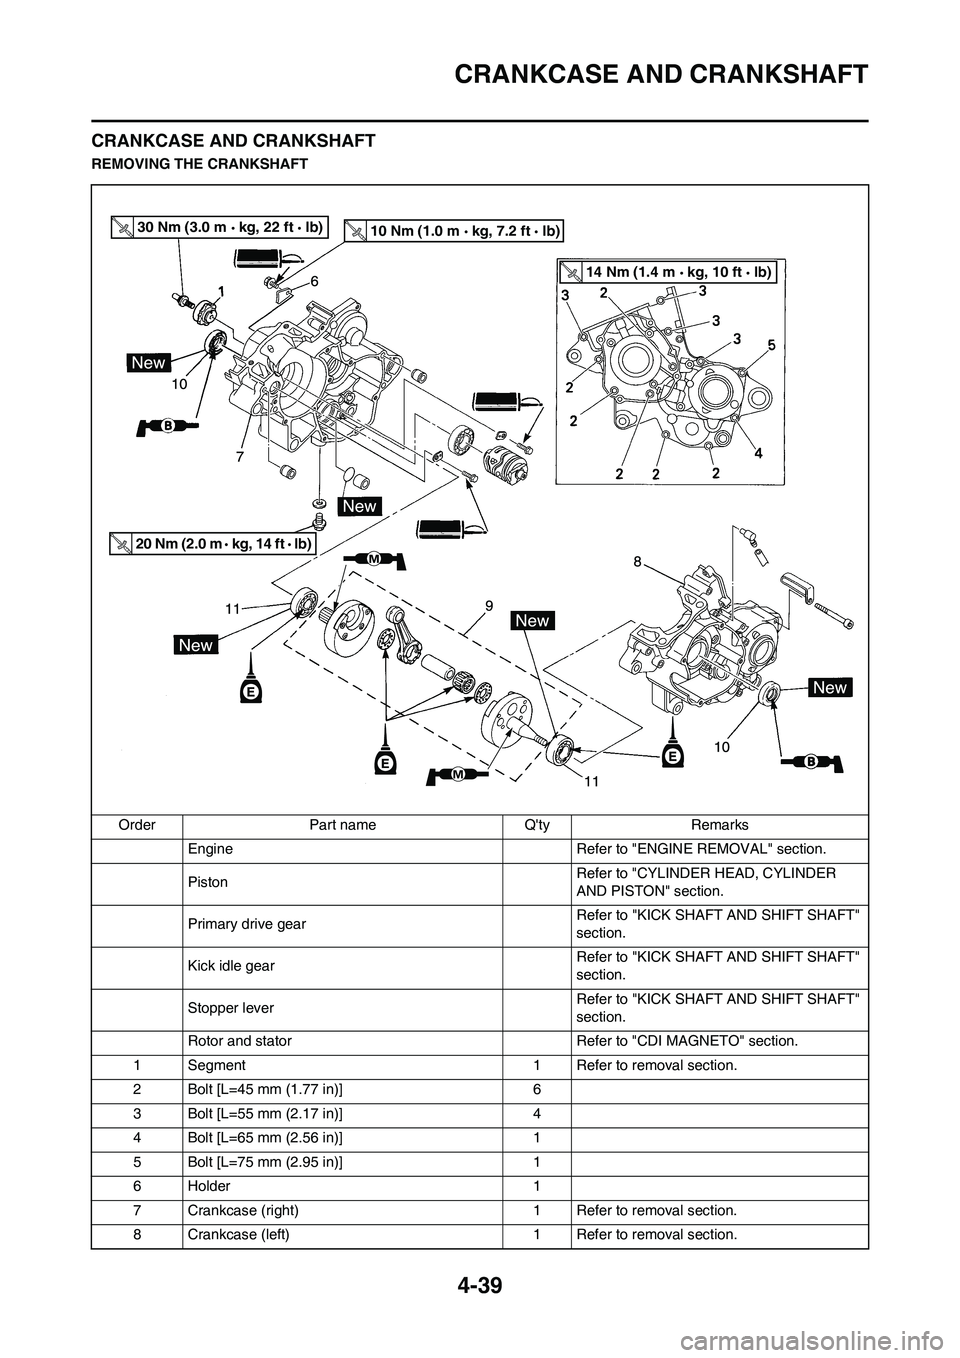 YAMAHA YZ125LC 2010 Service Manual 4-39
CRANKCASE AND CRANKSHAFT
CRANKCASE AND CRANKSHAFT
REMOVING THE CRANKSHAFT
Order Part name Qty Remarks
Engine Refer to "ENGINE REMOVAL" section.
PistonRefer to "CYLINDER HEAD, CYLINDER 
AND PISTO